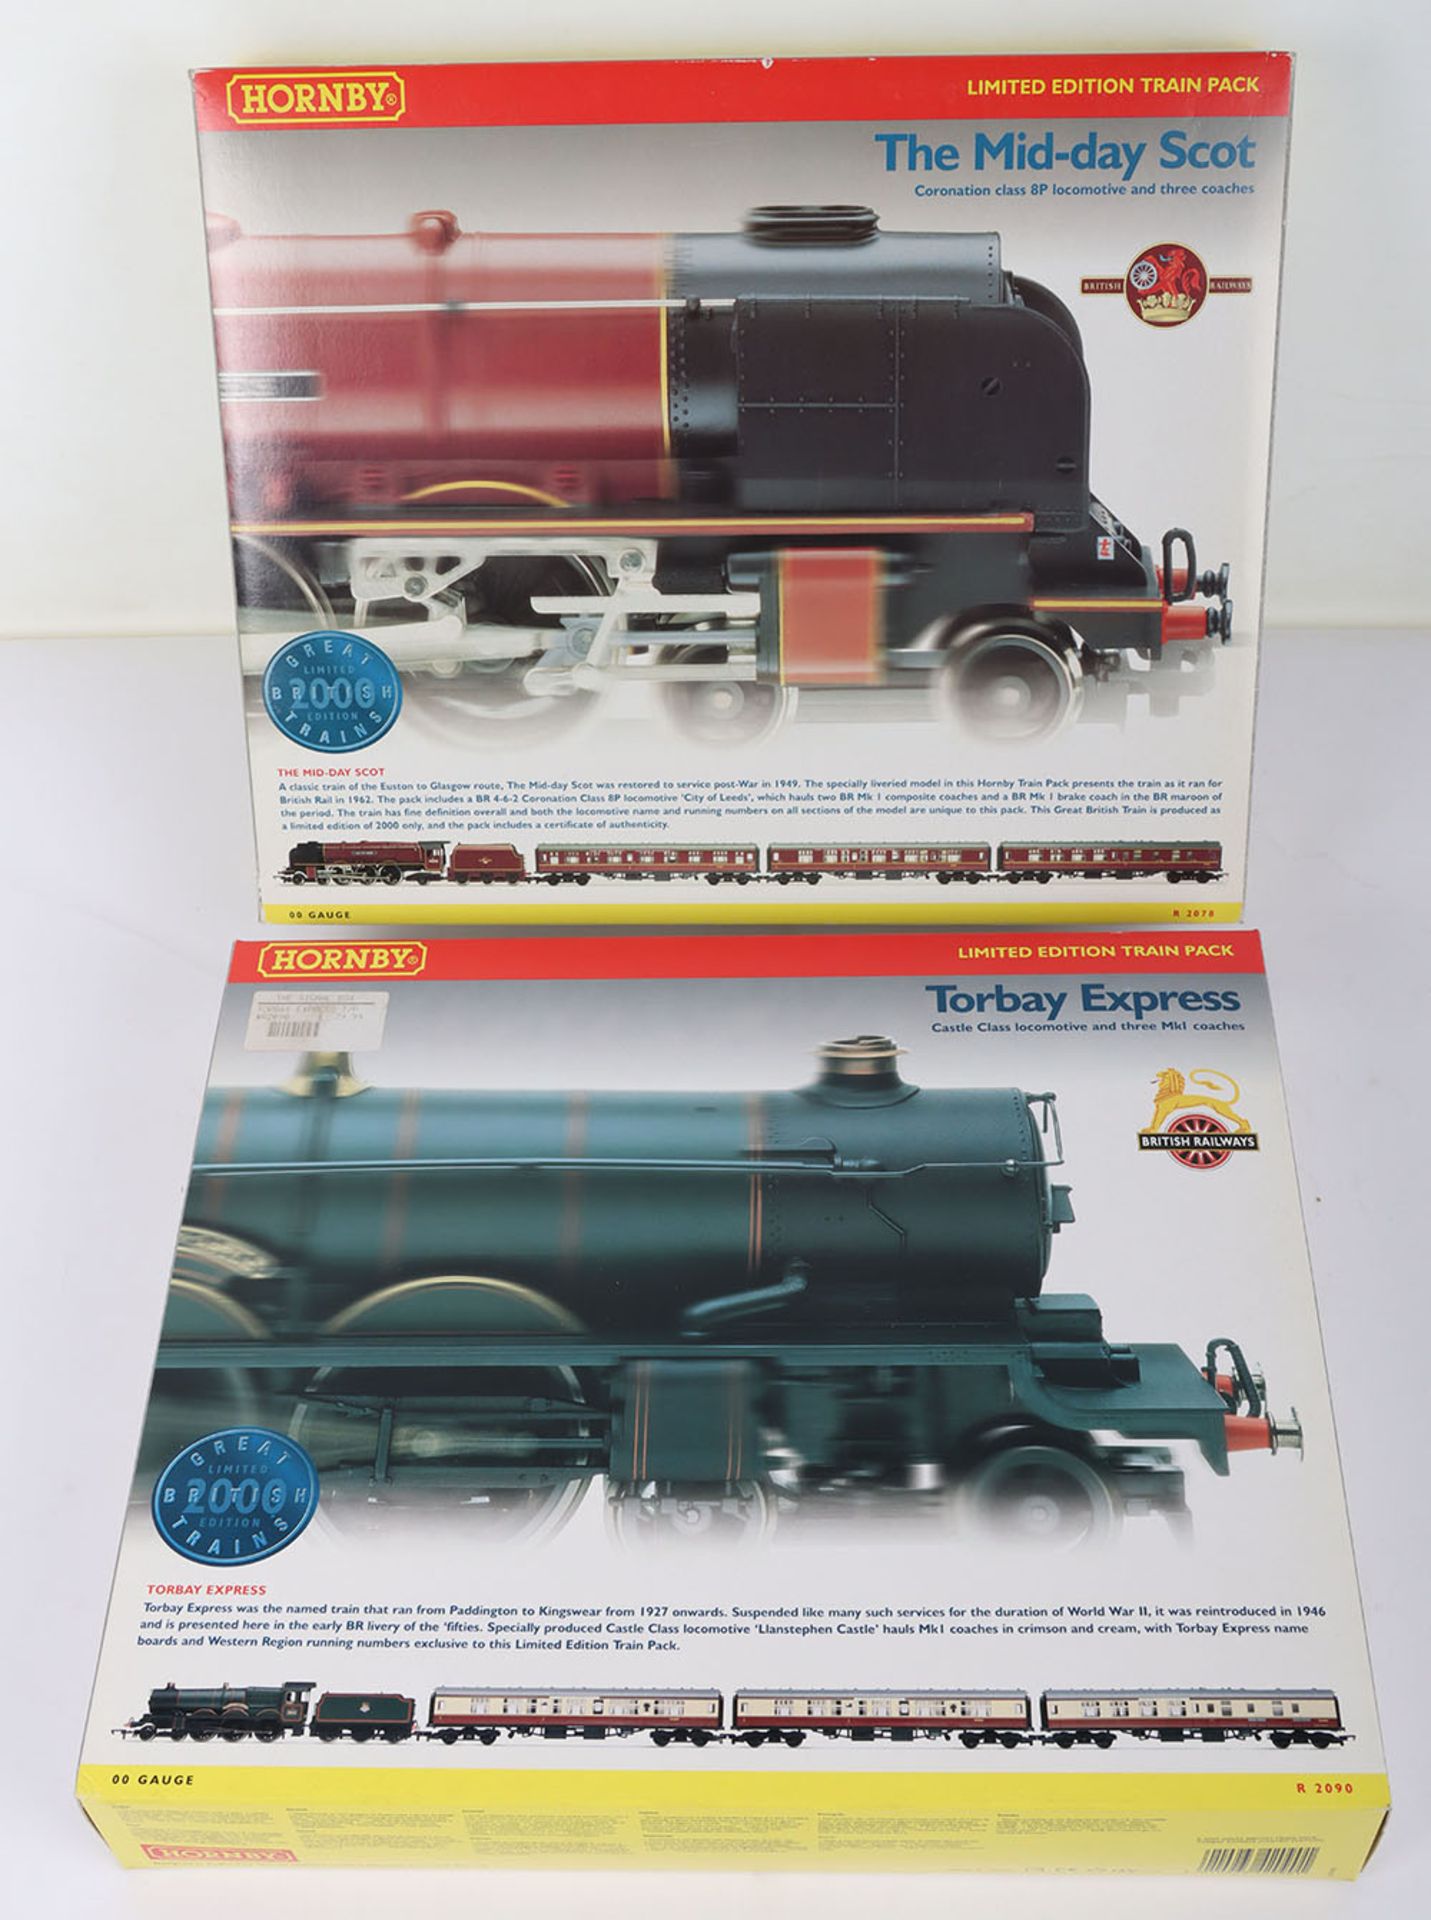 Two boxed Hornby Limited Edition Train Packs,